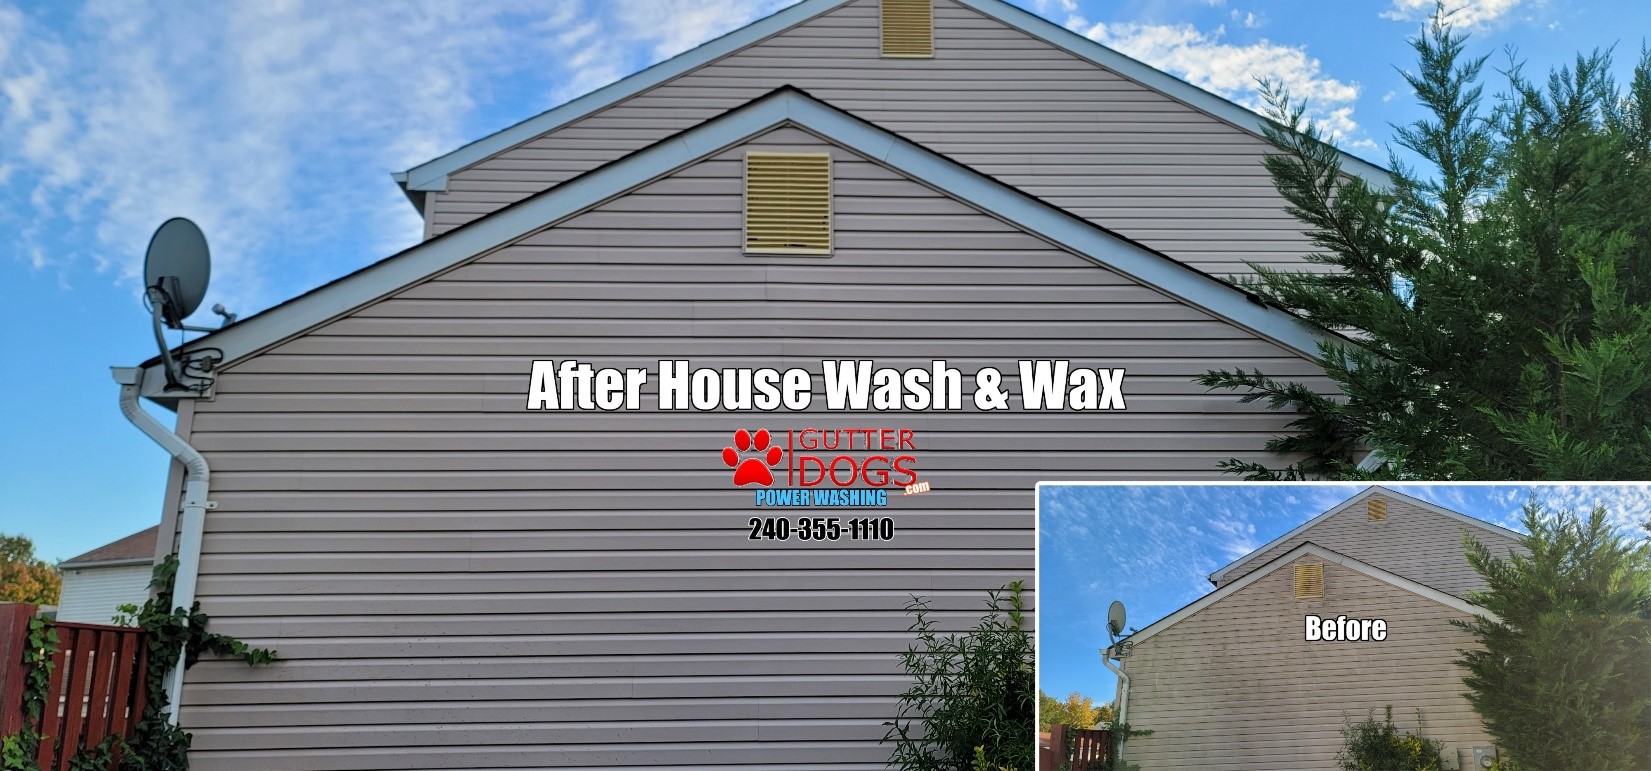 Power Washing Services in Fort Washington, MD